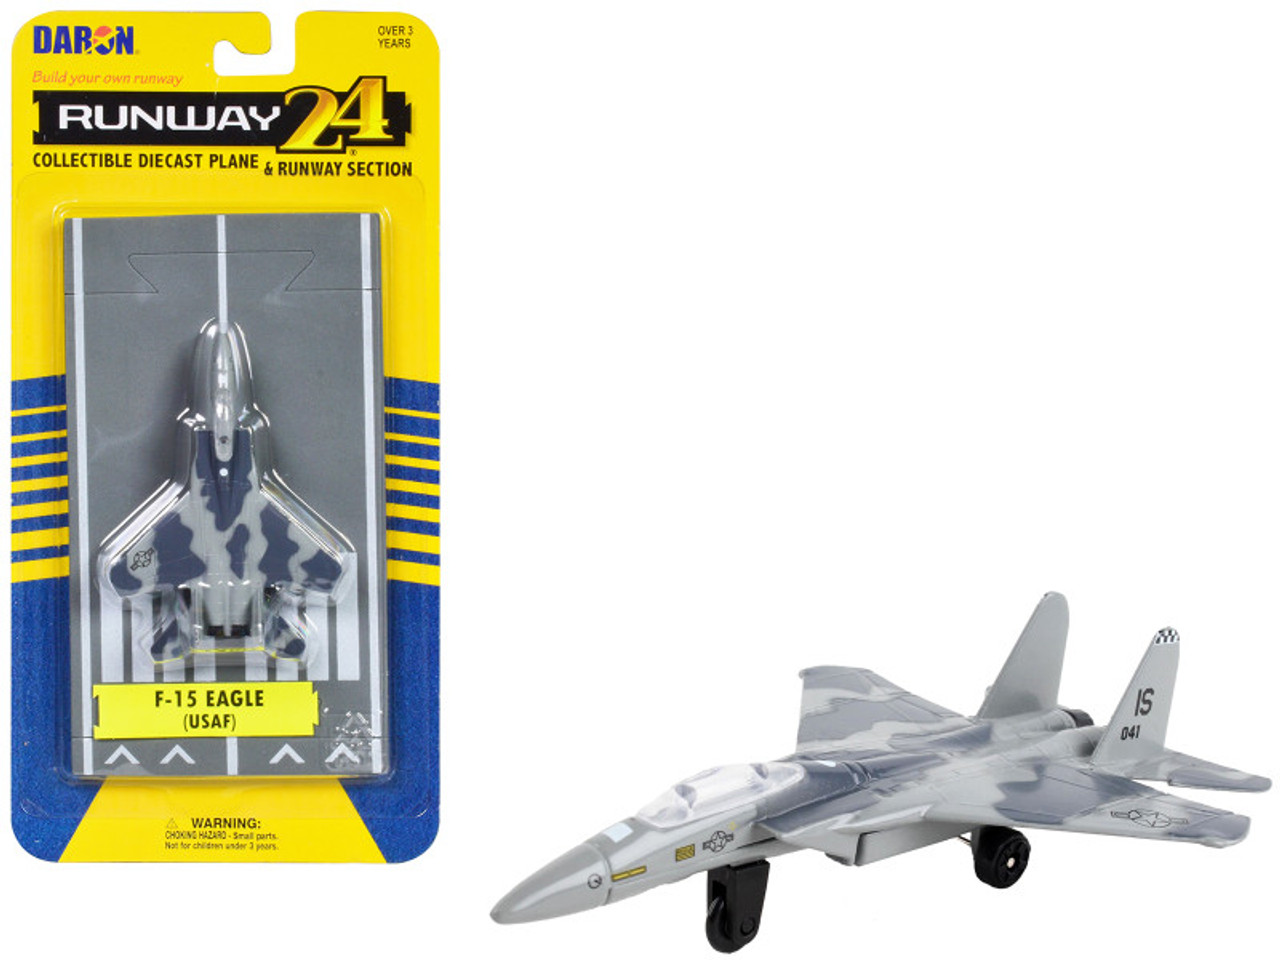 McDonnell Douglas F-15 Eagle Fighter Aircraft Gray Camouflage "United States Air Force" with Runway Section Diecast Model Airplane by Runway24